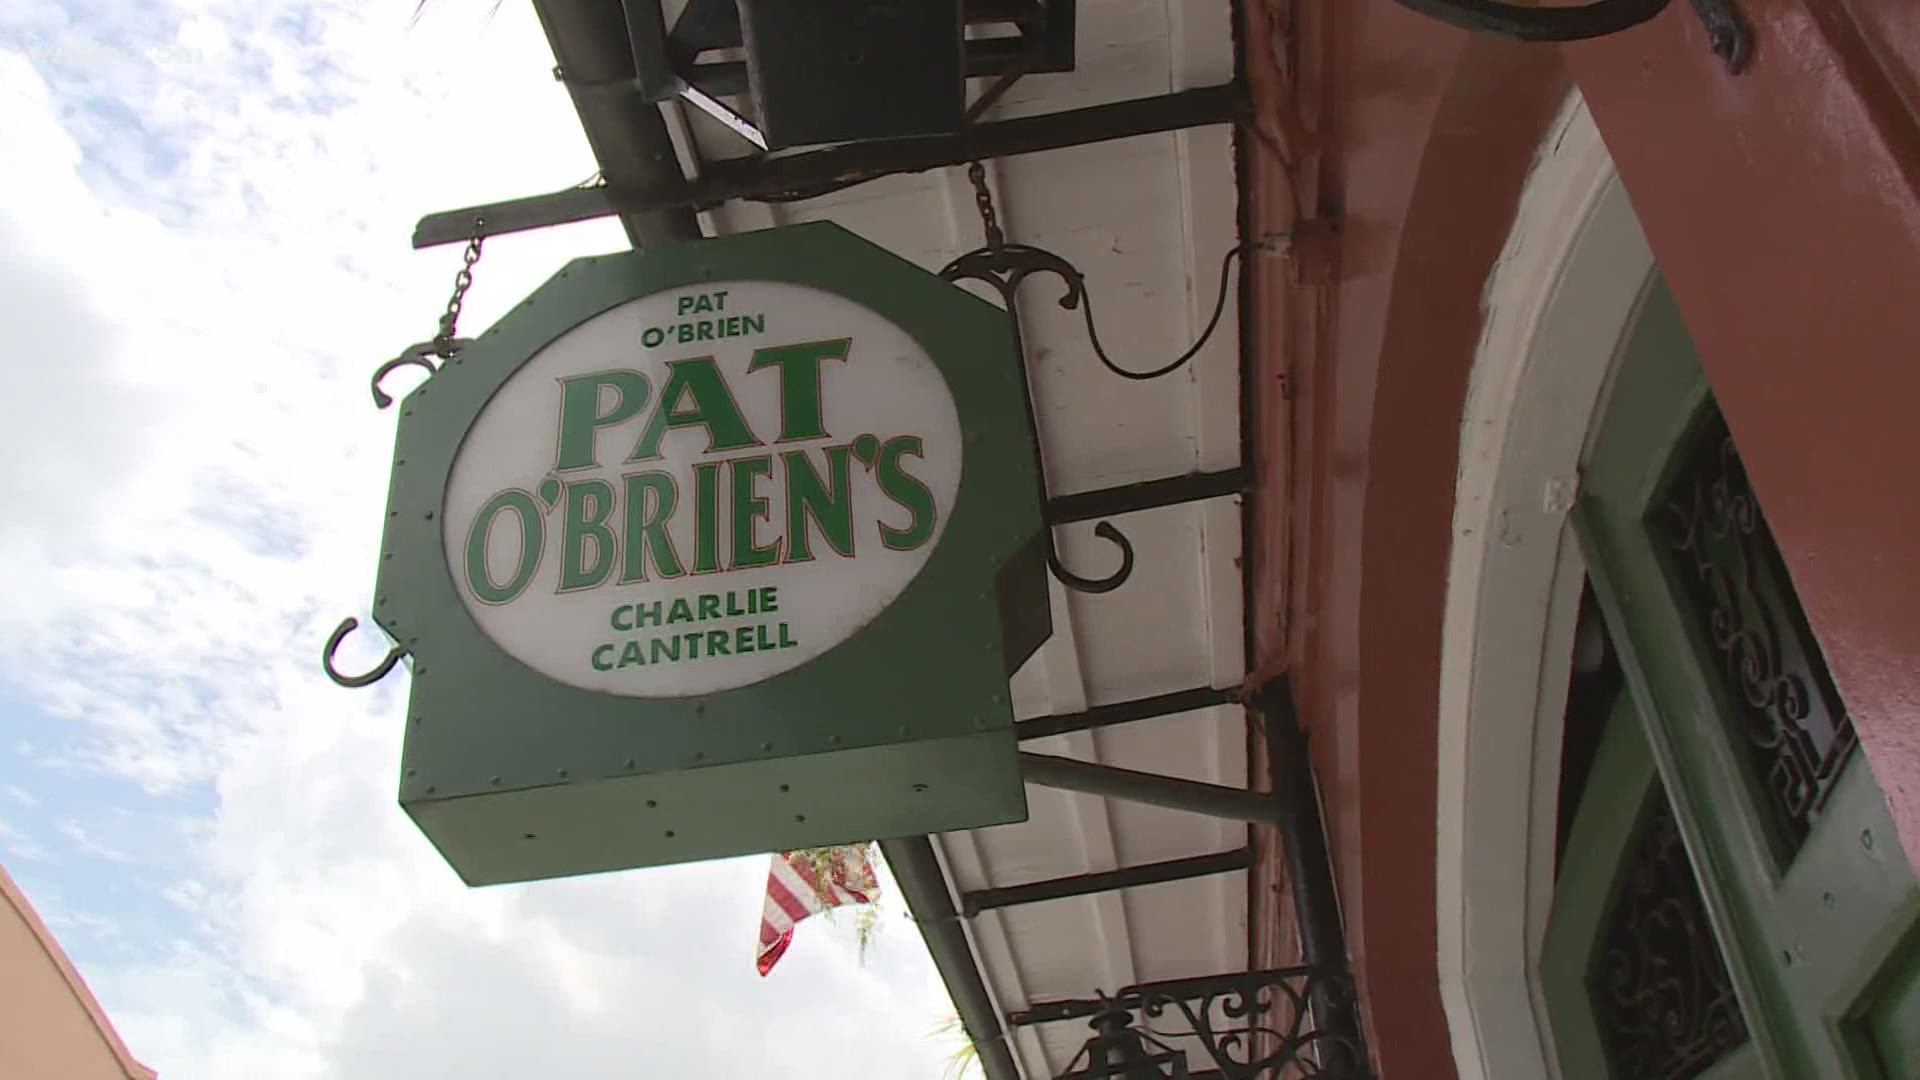 One of the most well known bars in all of New Orleans is reopening under 'restaurant rules,' so people who want a Hurricane, need to sit at a table and purchase food